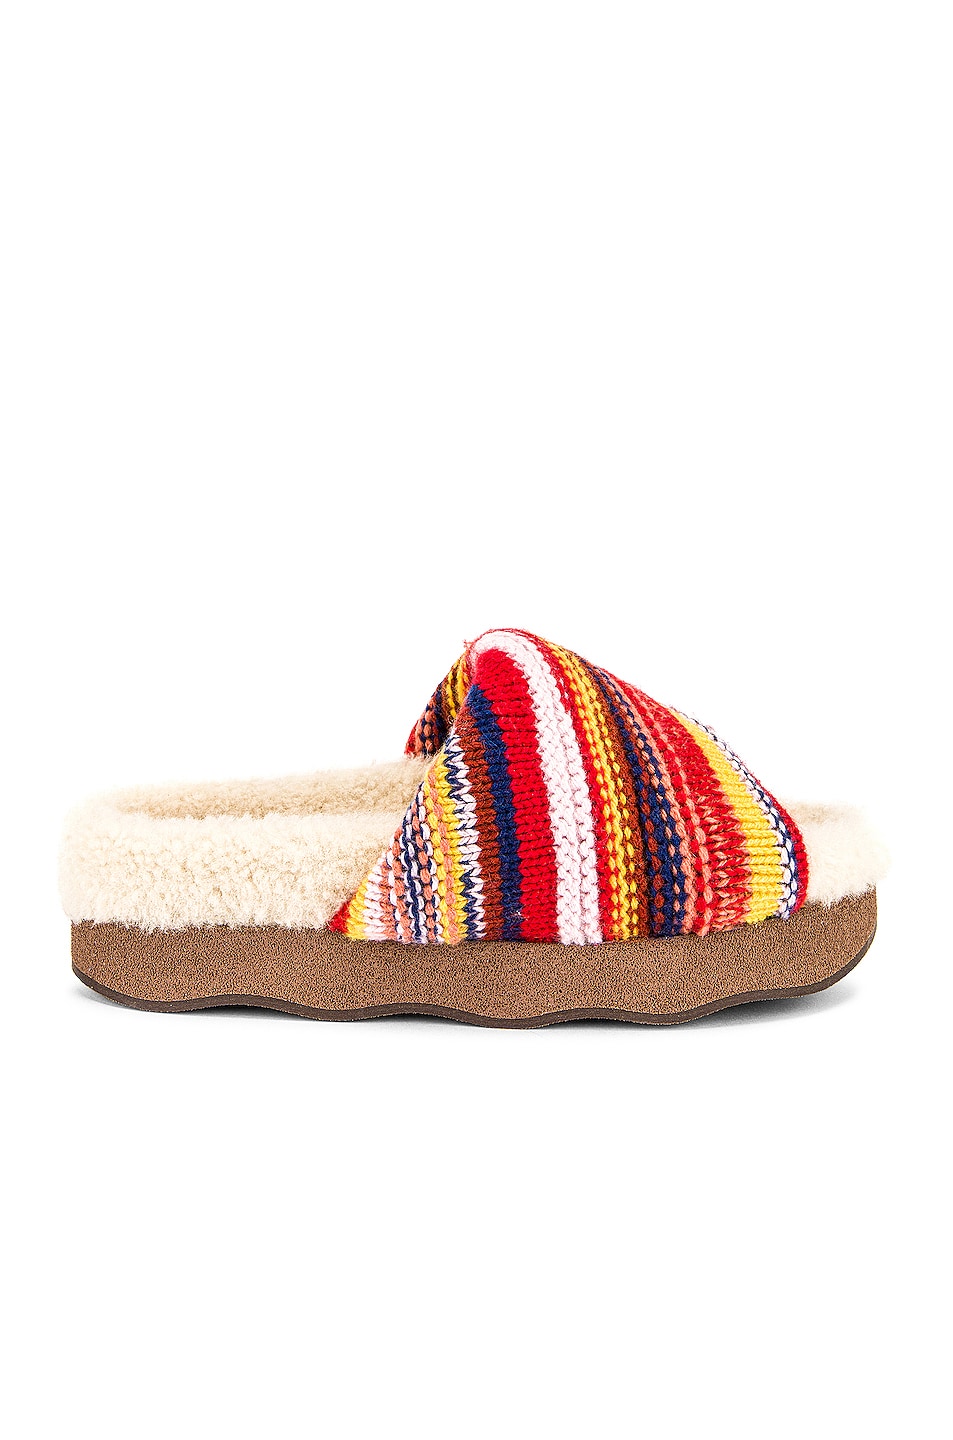 Image 1 of Chloe Wavy Slides in Multicolor Red